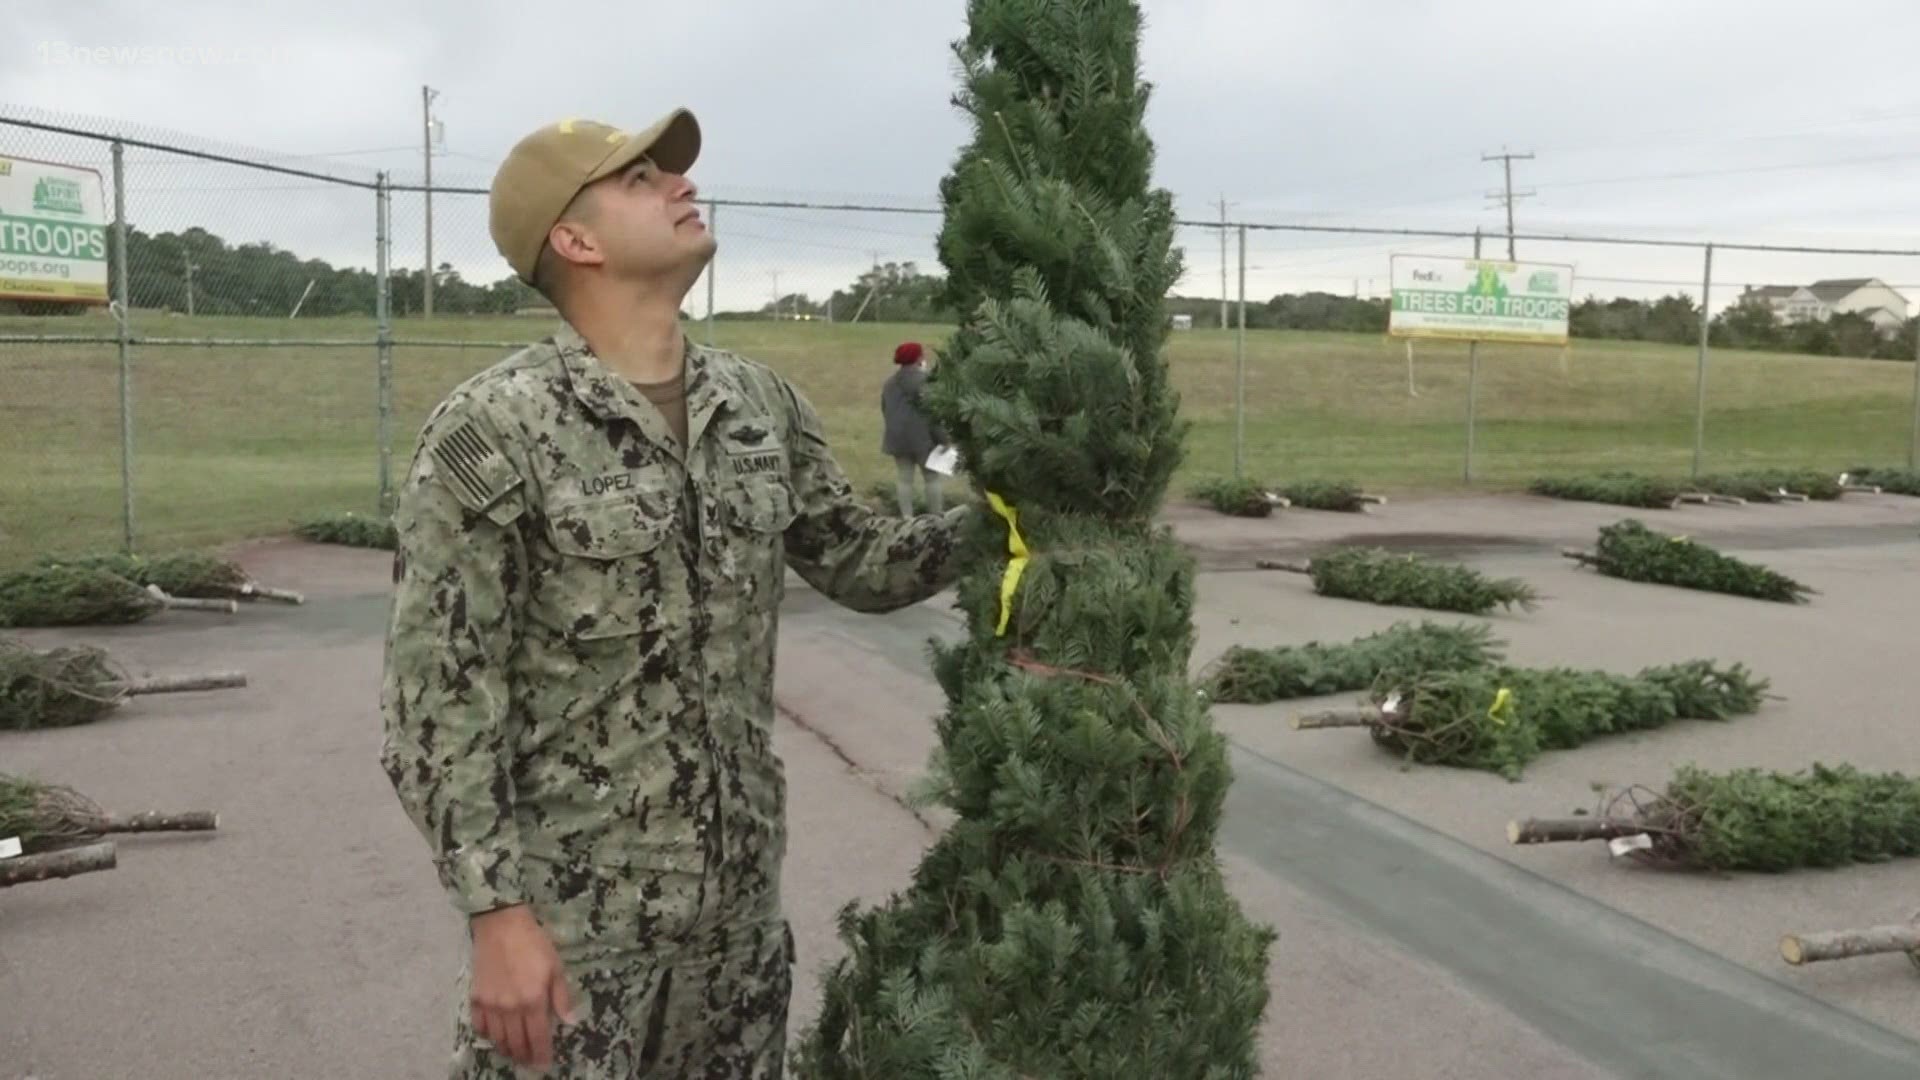 Hundreds of military families in Hampton Roads got a little holiday cheer. They got free Christmas trees, thanks to the 13th annual "Trees for Troops" giveaway.